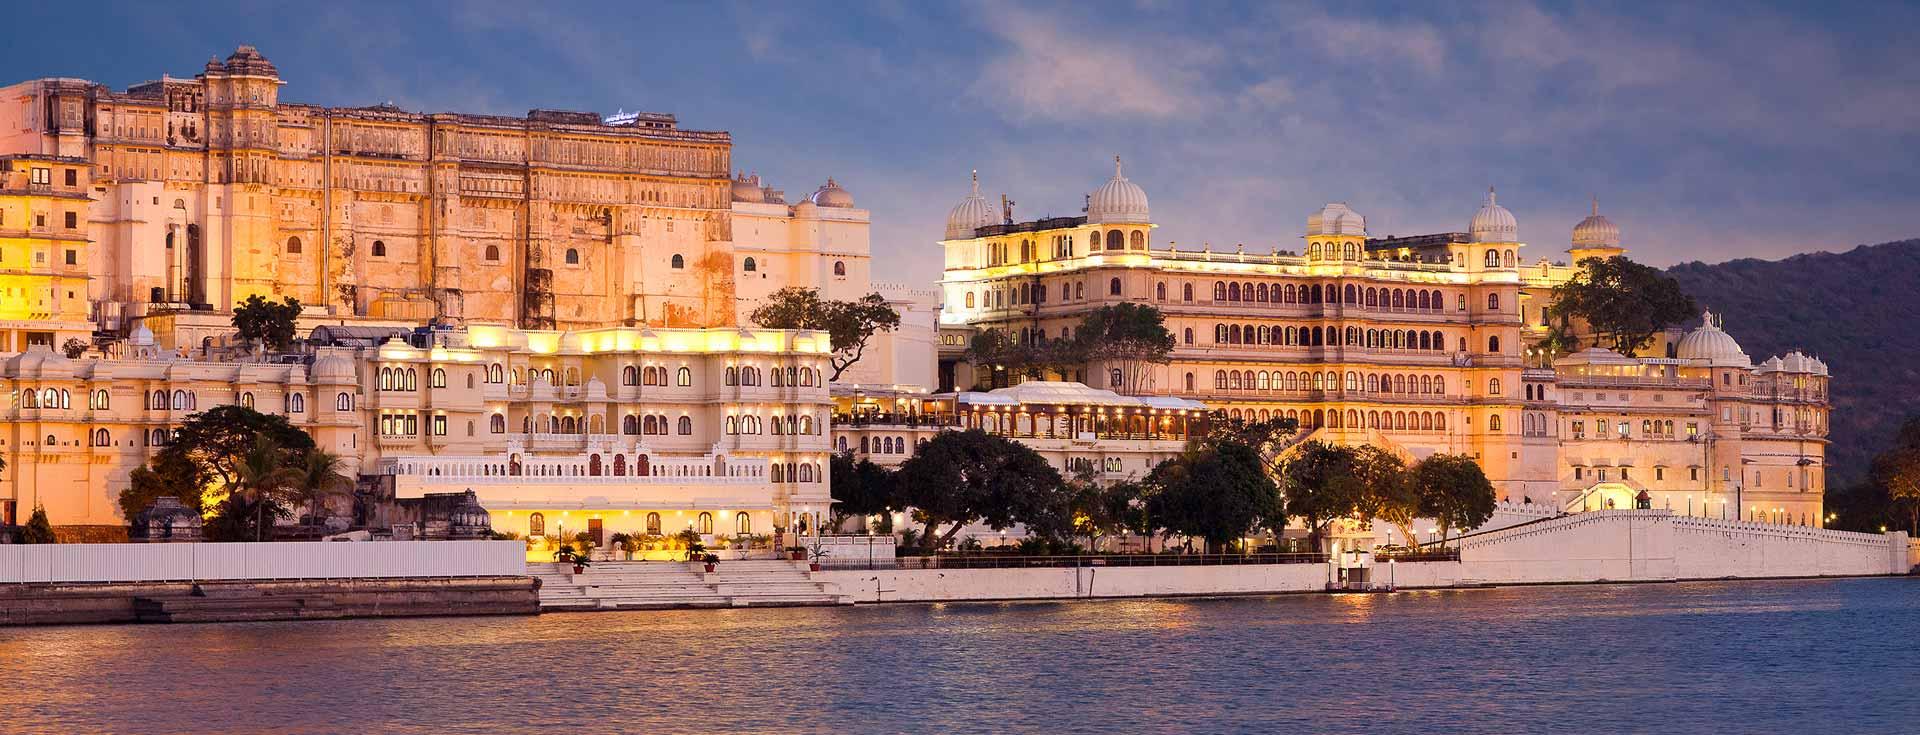 Explore City Palace in Udaipur